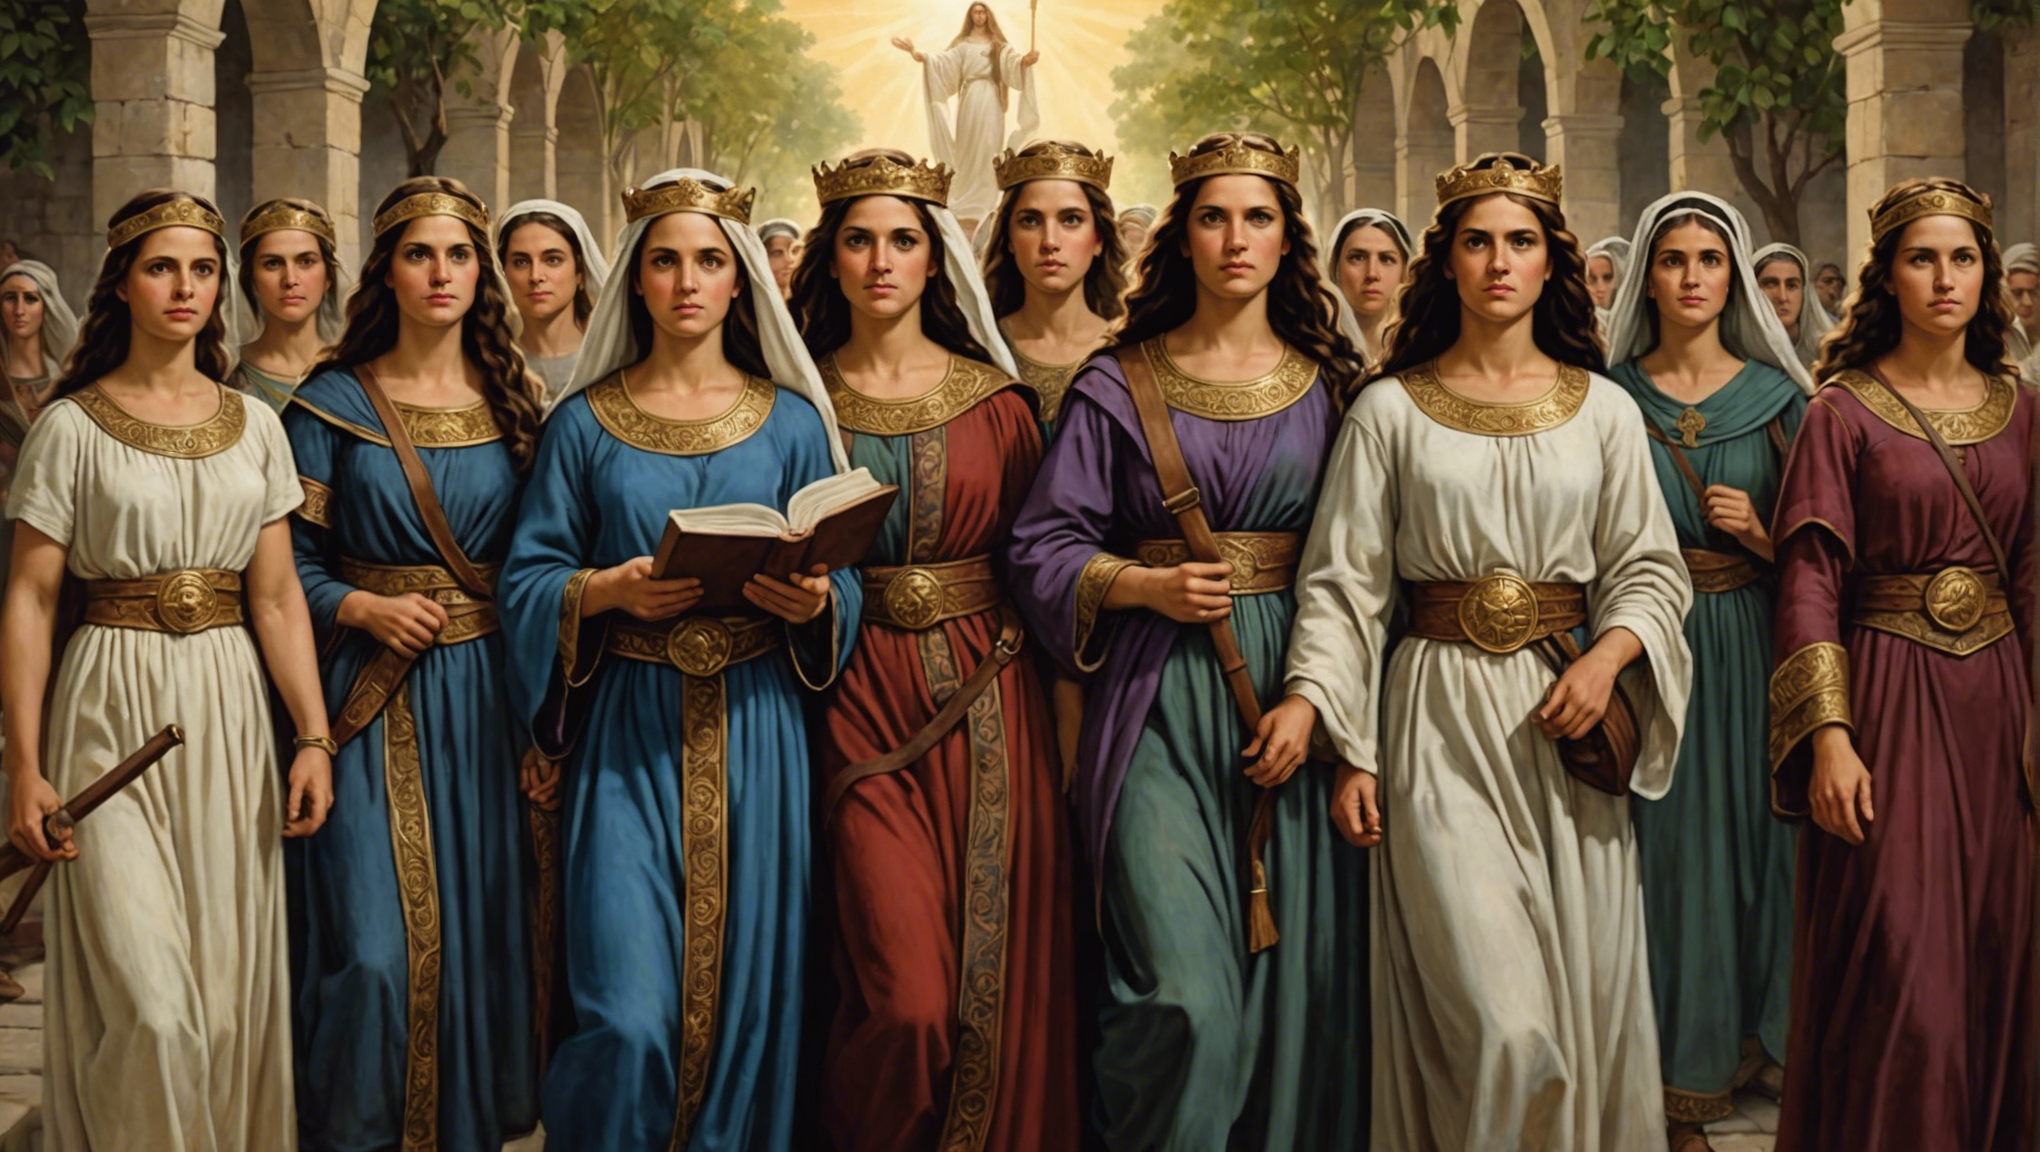 explore the stories of the women of valor in the bible and discover their strength, wisdom, and courage. learn about their remarkable contributions to biblical history and their enduring impact.